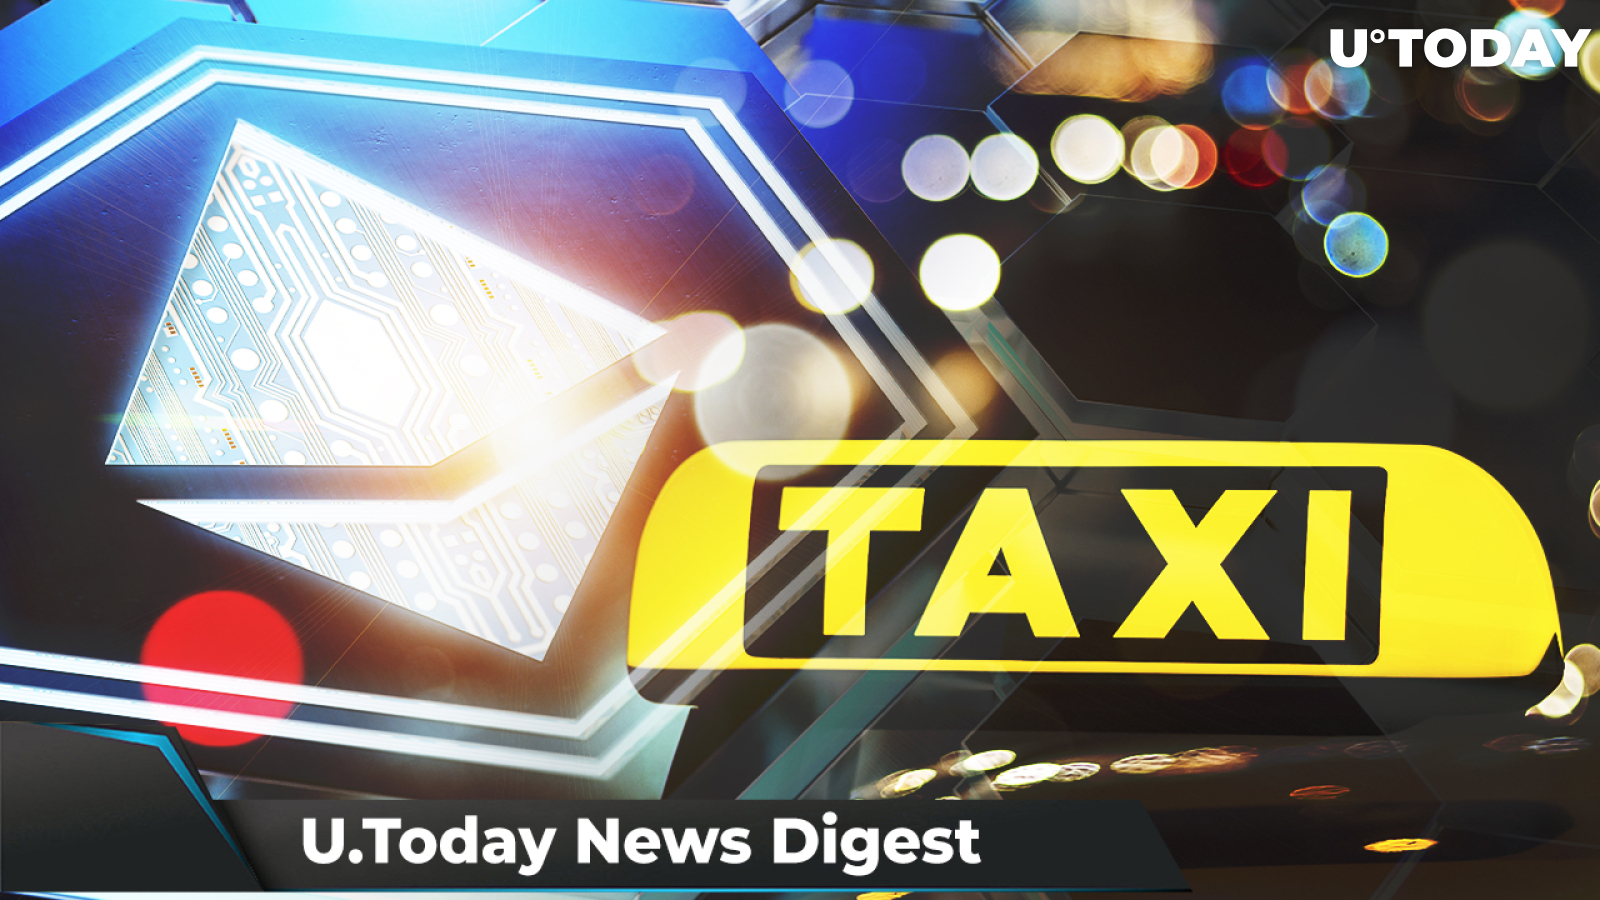 ETH to Plunge to $2,500 by June, Spanish Taxi Company Accepts SHIB, Snoop Dogg NFT Collections Available on Cardano: Crypto News Digest by U.Today